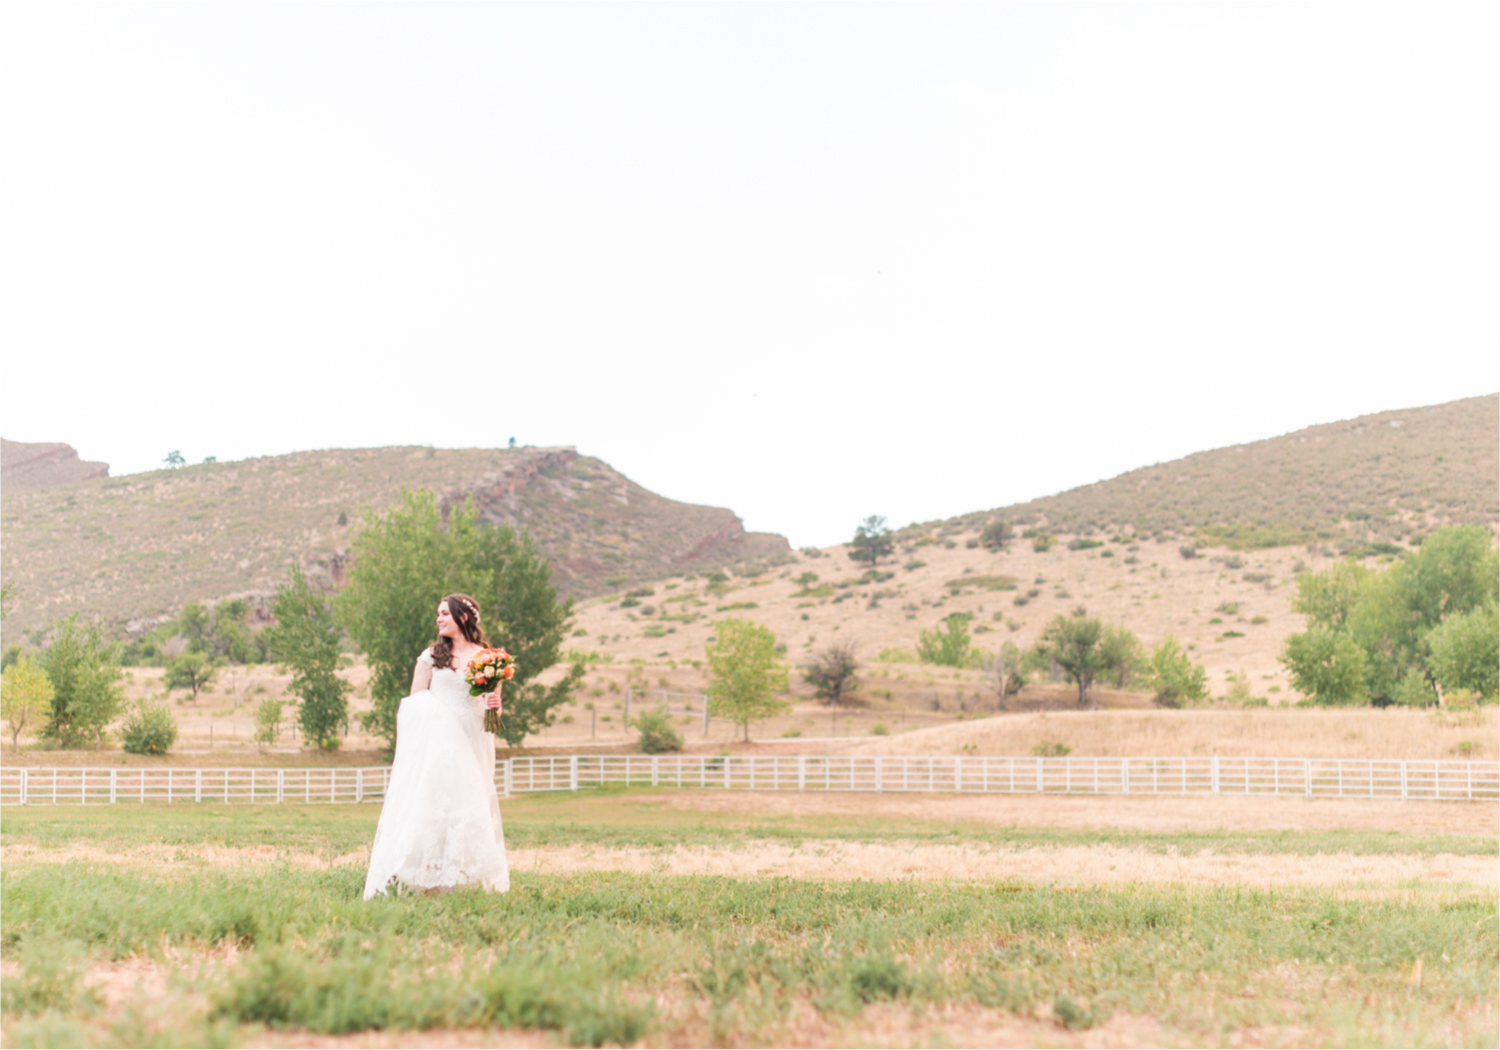 Summer Ellis Ranch Wedding in Loveland Colorado | Britni Girard Photography | Wedding Photo and Video Team | Bride hair Dondi AtWow from Sola Salon in Loveland | Floral hair crystals | Bridal Portraits | Orange Bouquet | Bride in Field at Rance